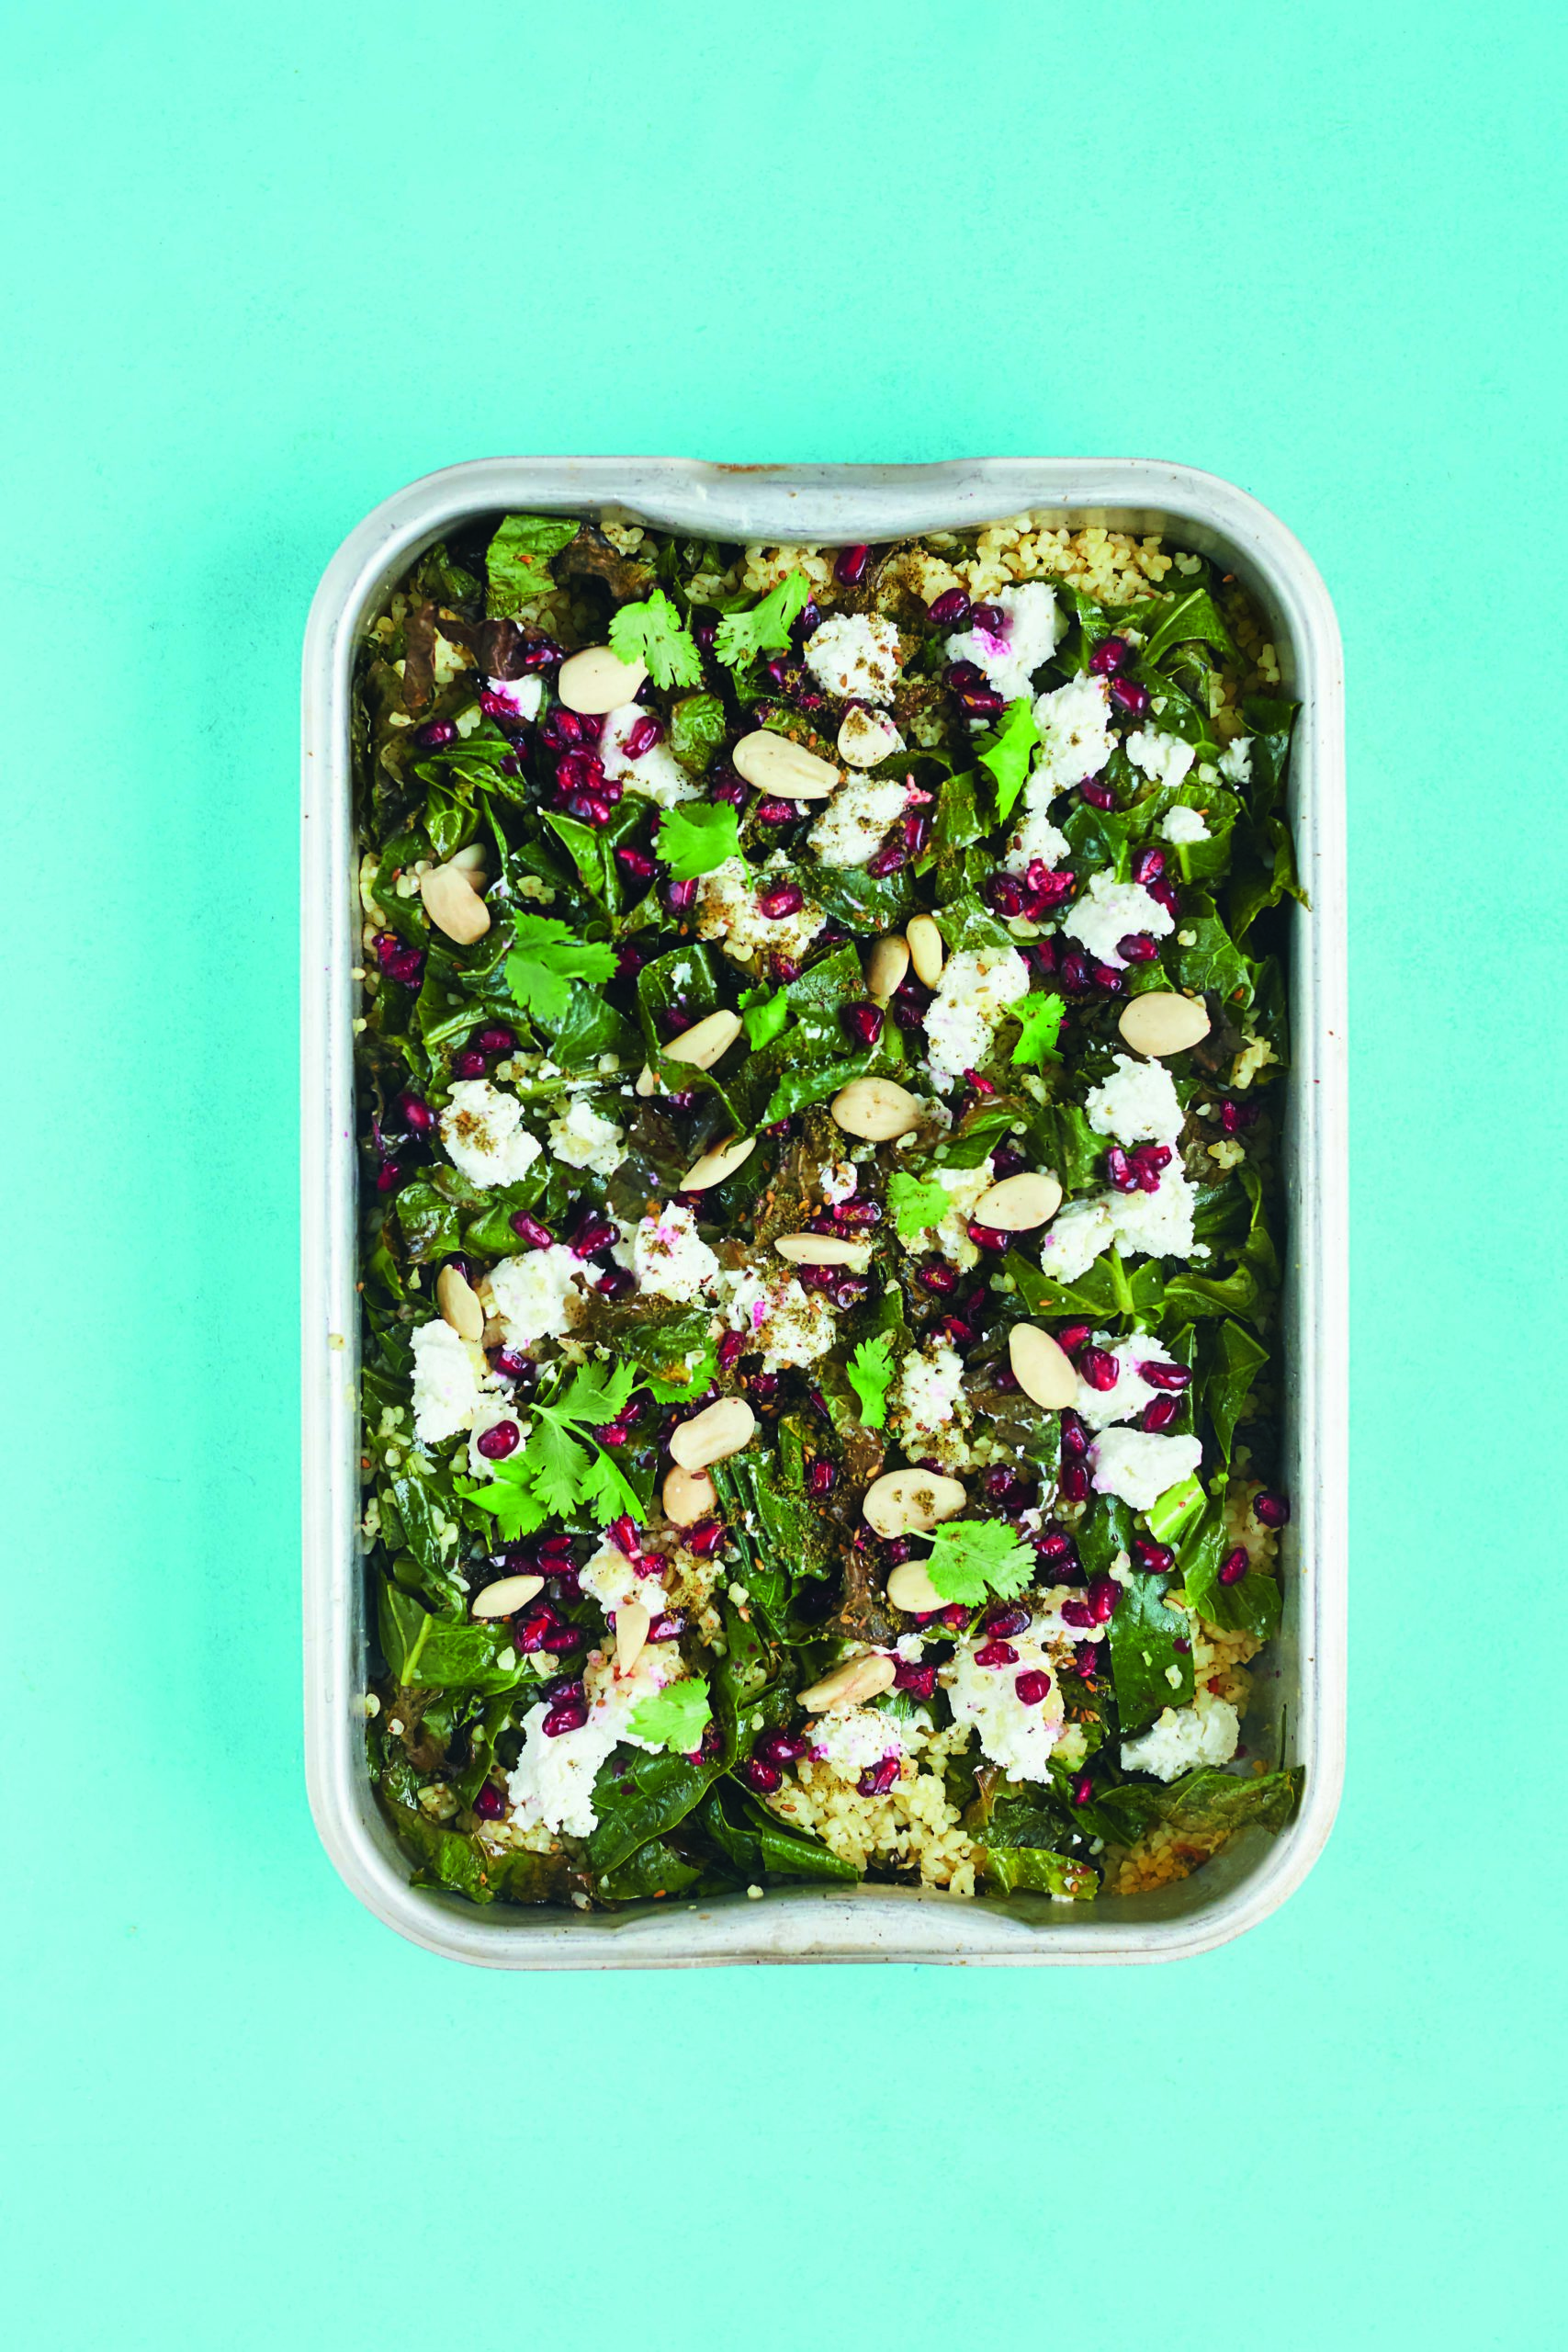 Crispy Kale and Bulgur Wheat Salad With Pomegranates, Preserved Lemon, Goat’s Cheese and Almonds